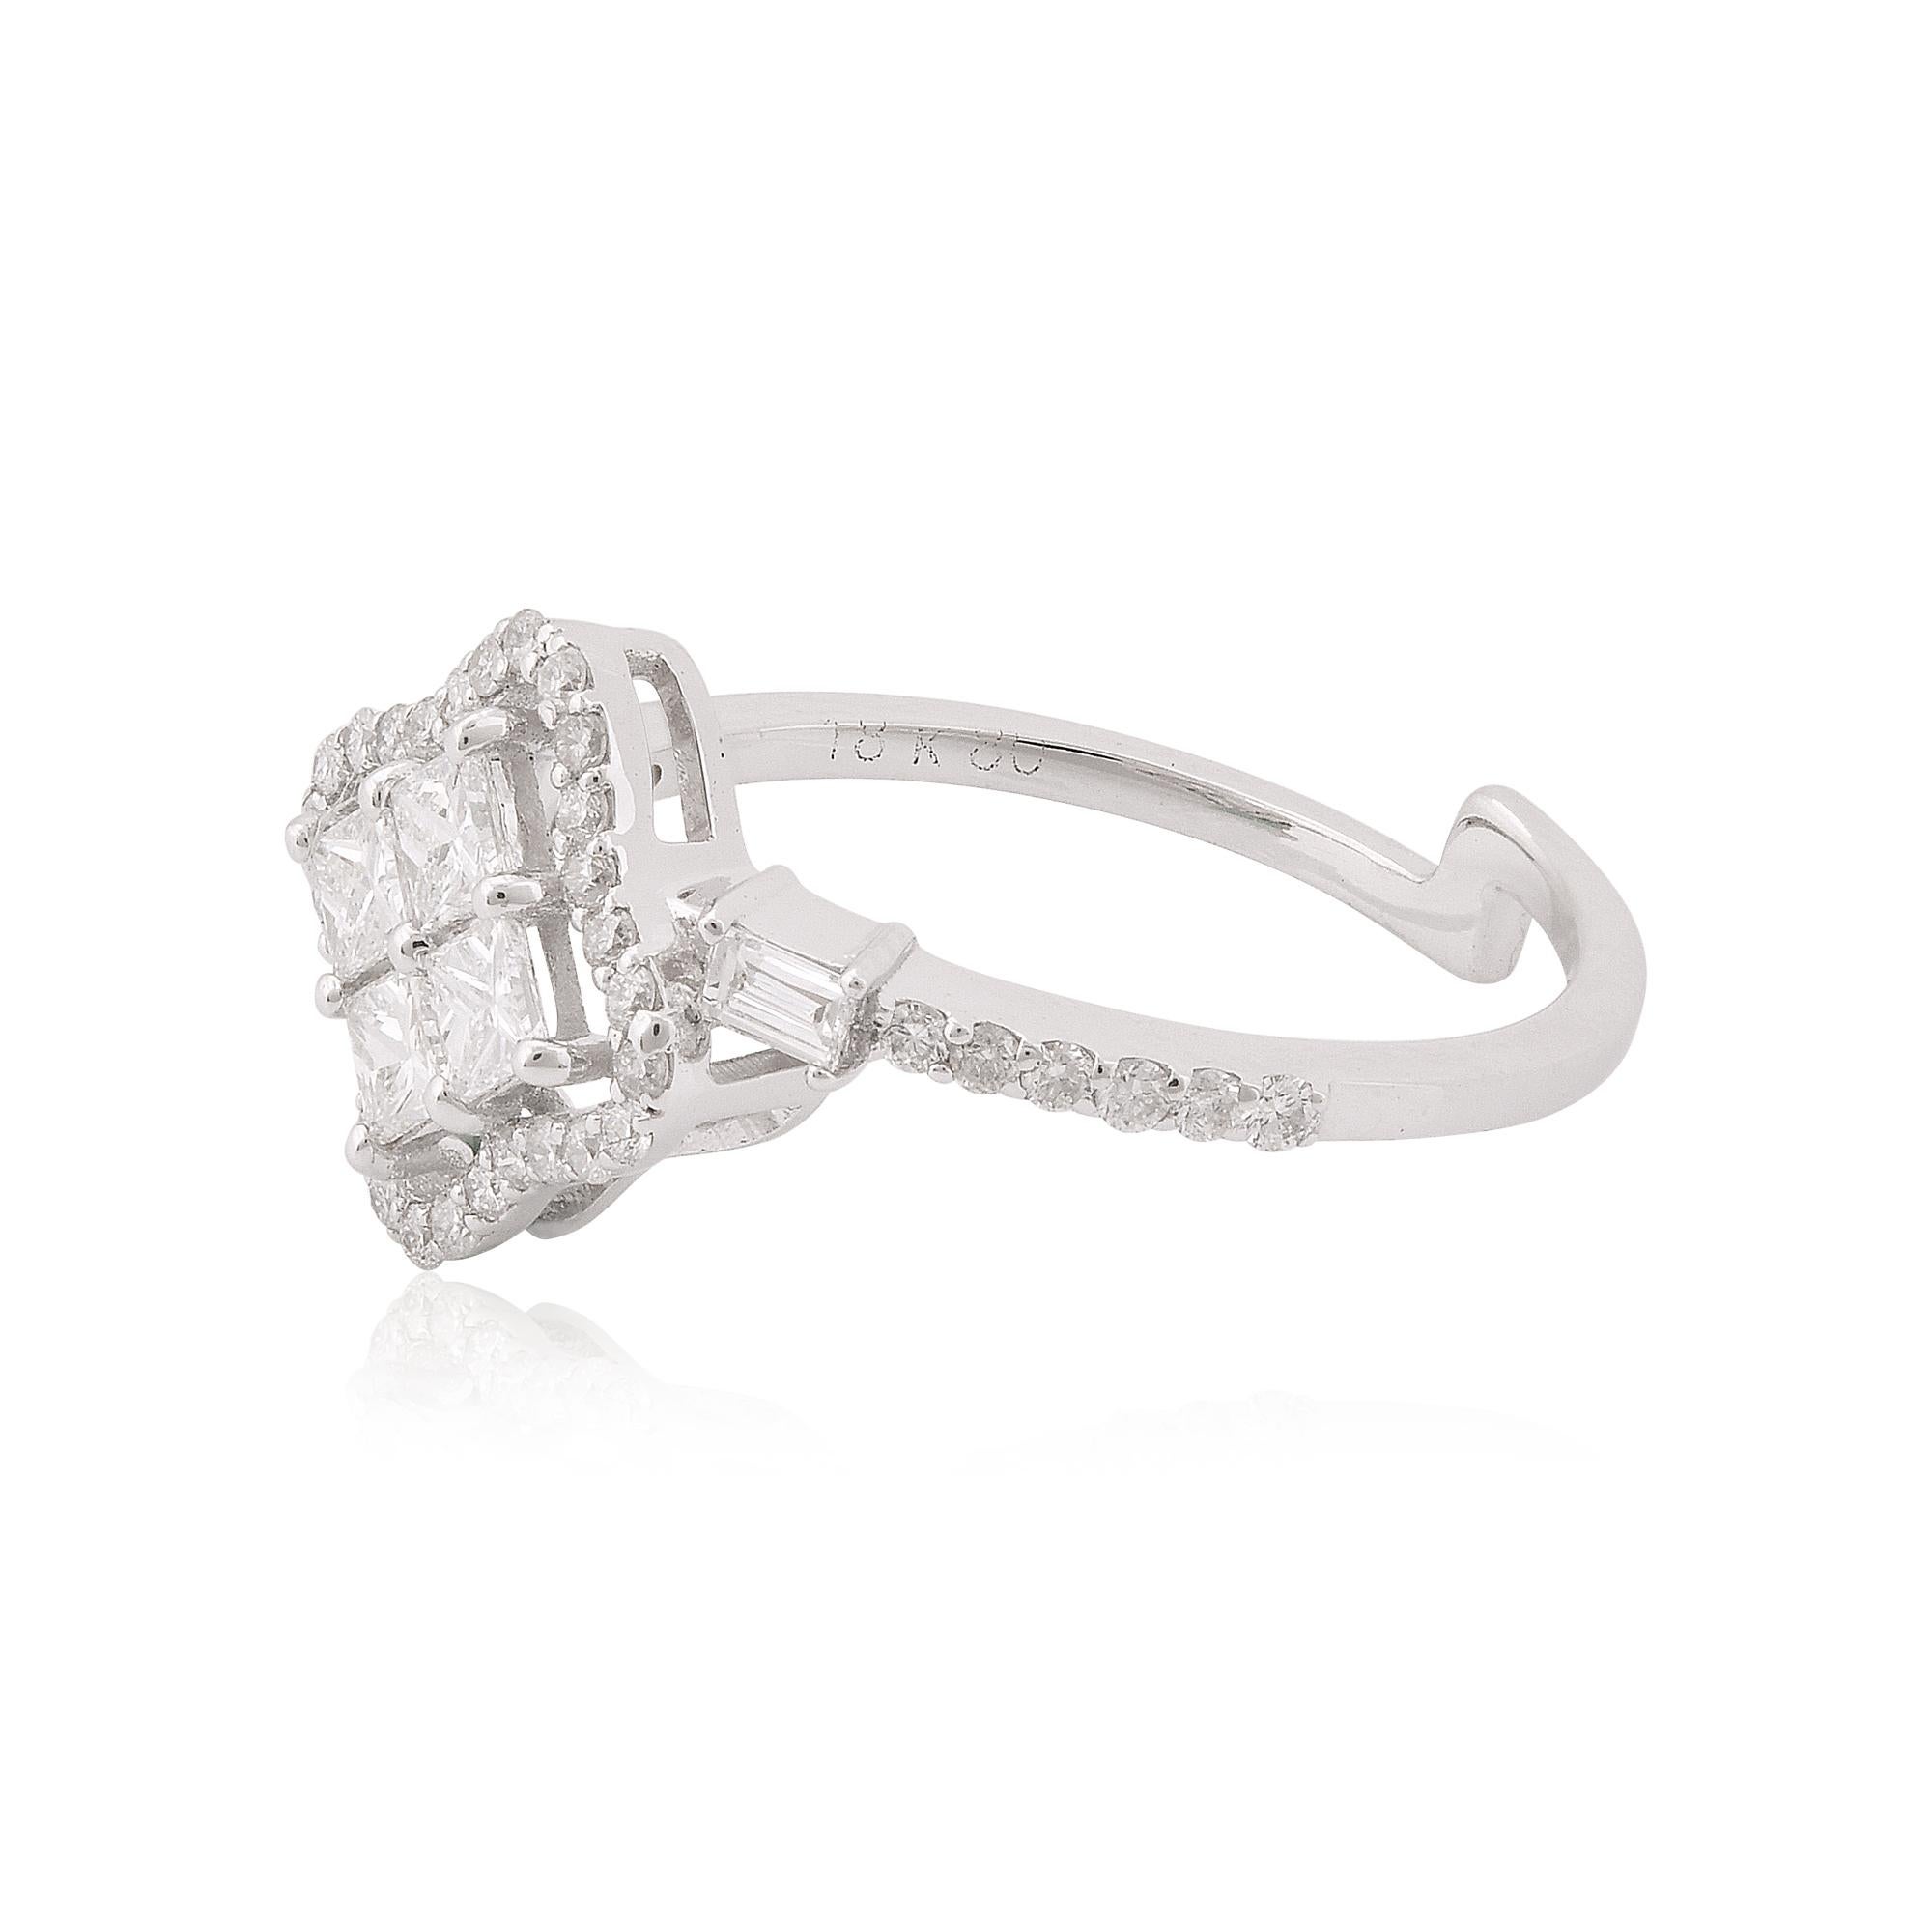 Indulge in the luxurious allure of this exquisite ring and let it become a symbol of your unique style and grace. With its natural diamonds, fine white gold craftsmanship, and stunning design, it is more than just a ring—it is a wearable work of